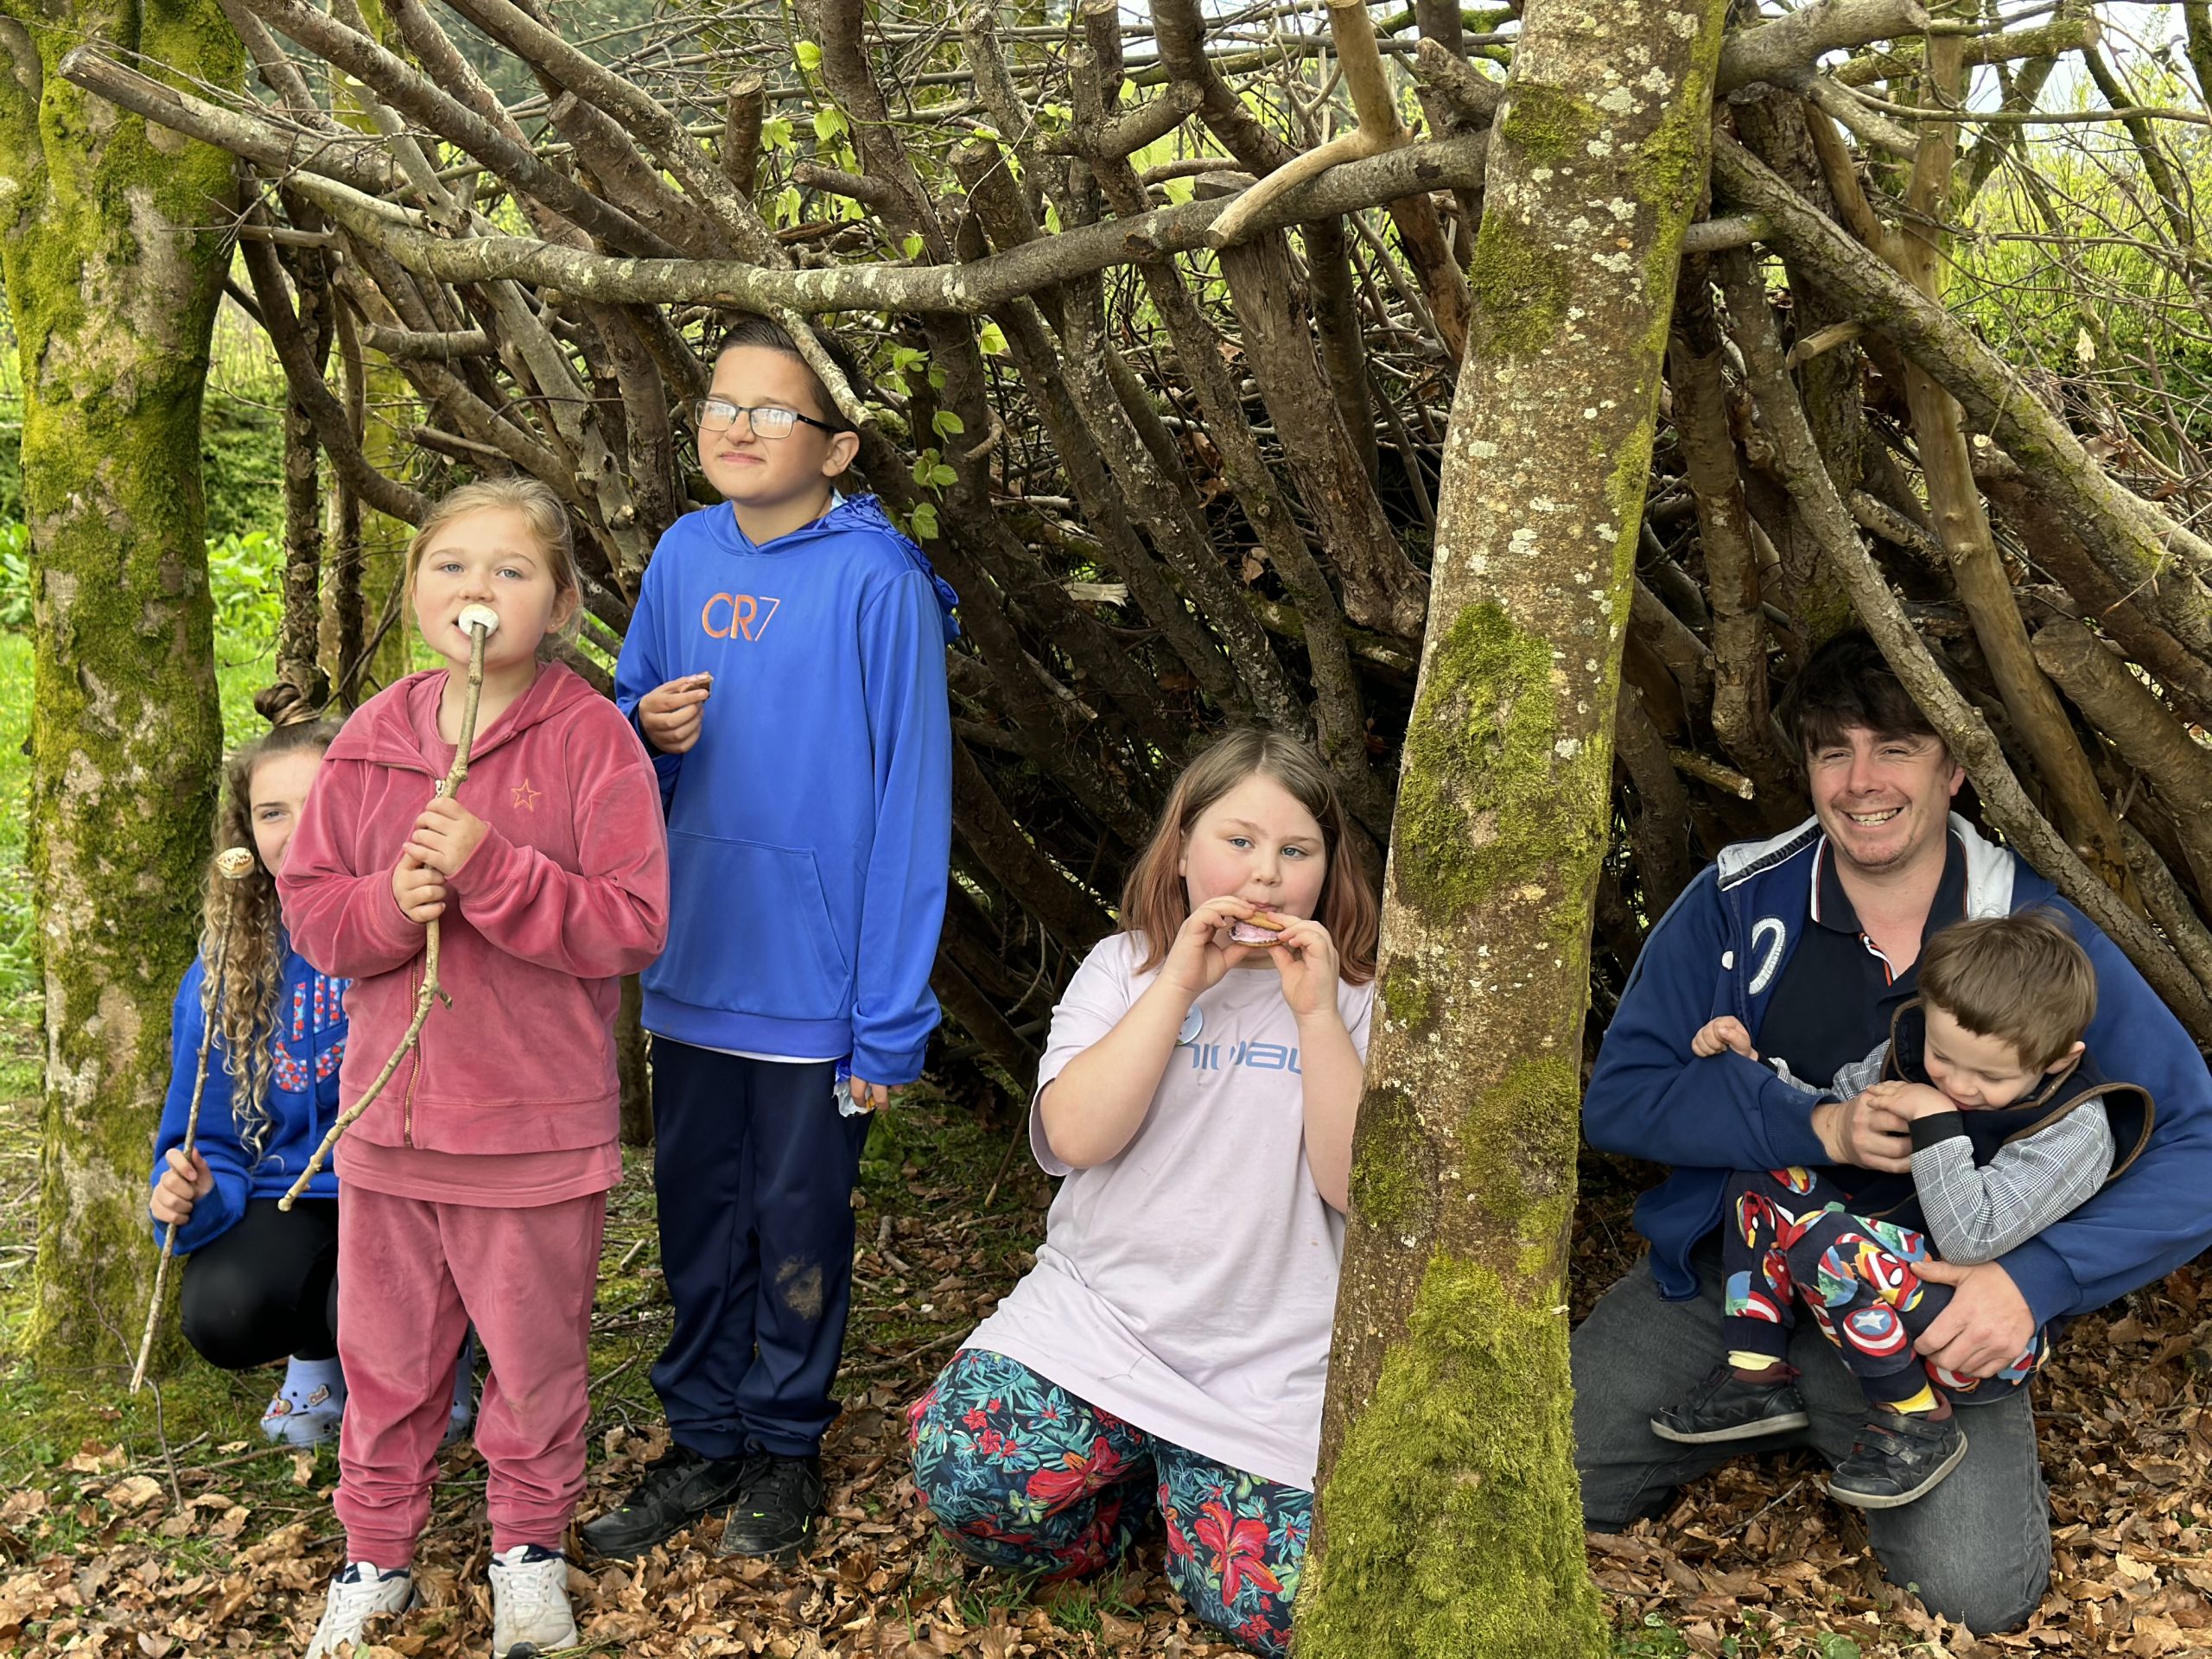 4 children and an adult holding a toddler are under a wooden-built shelter between two trees, smiling at the camera and eating marshmallows.